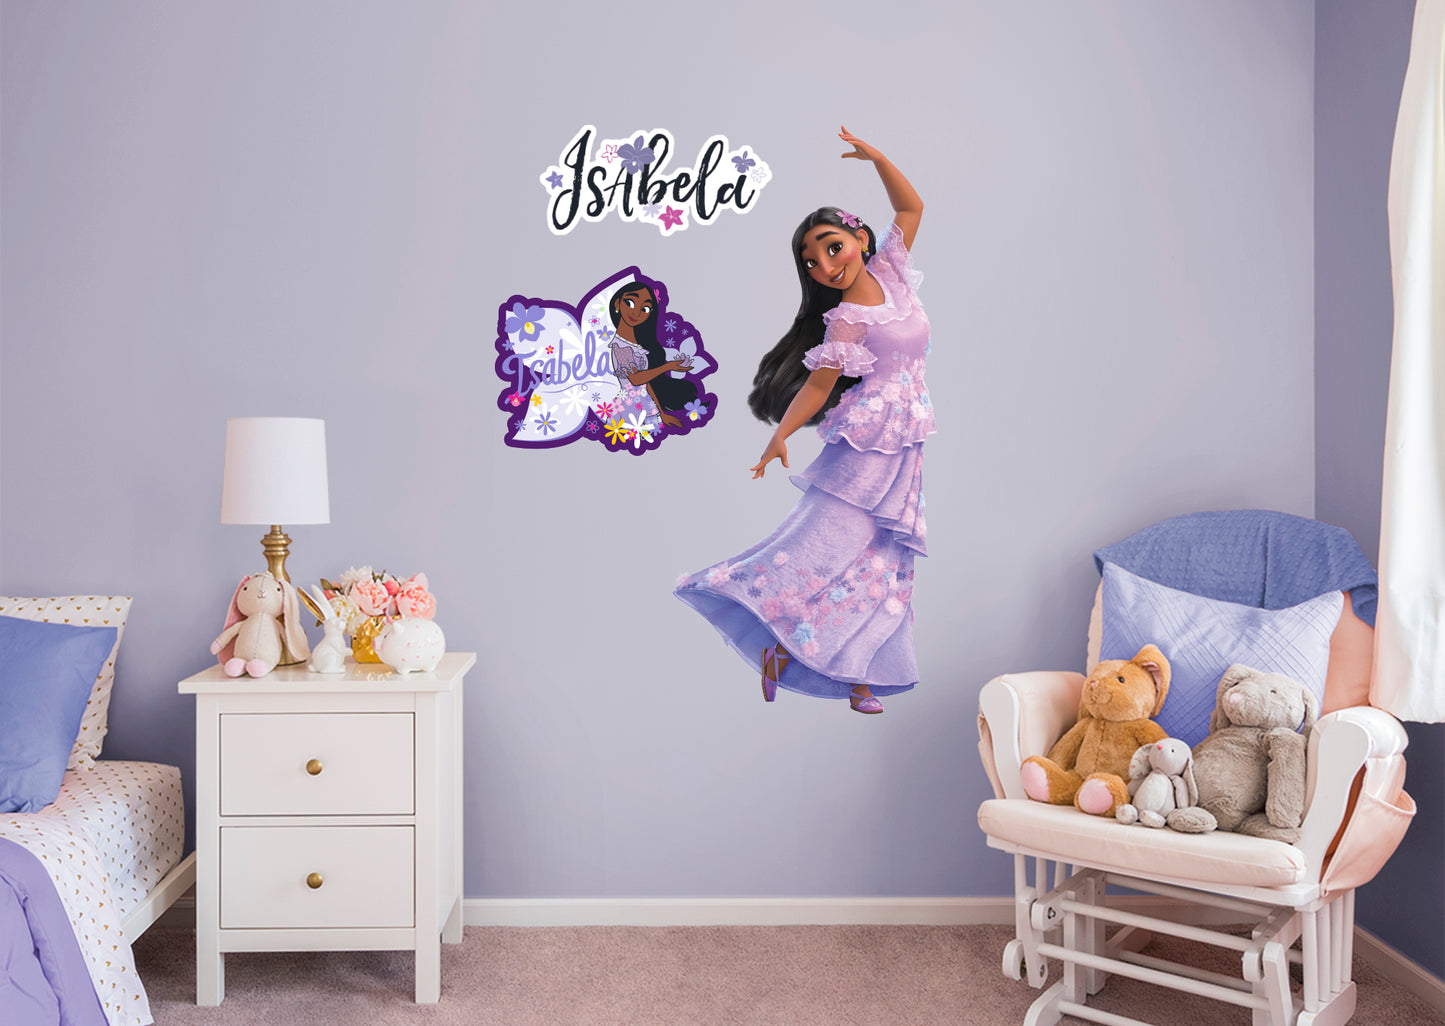 Encanto: Isabela RealBig        - Officially Licensed Disney Removable     Adhesive Decal